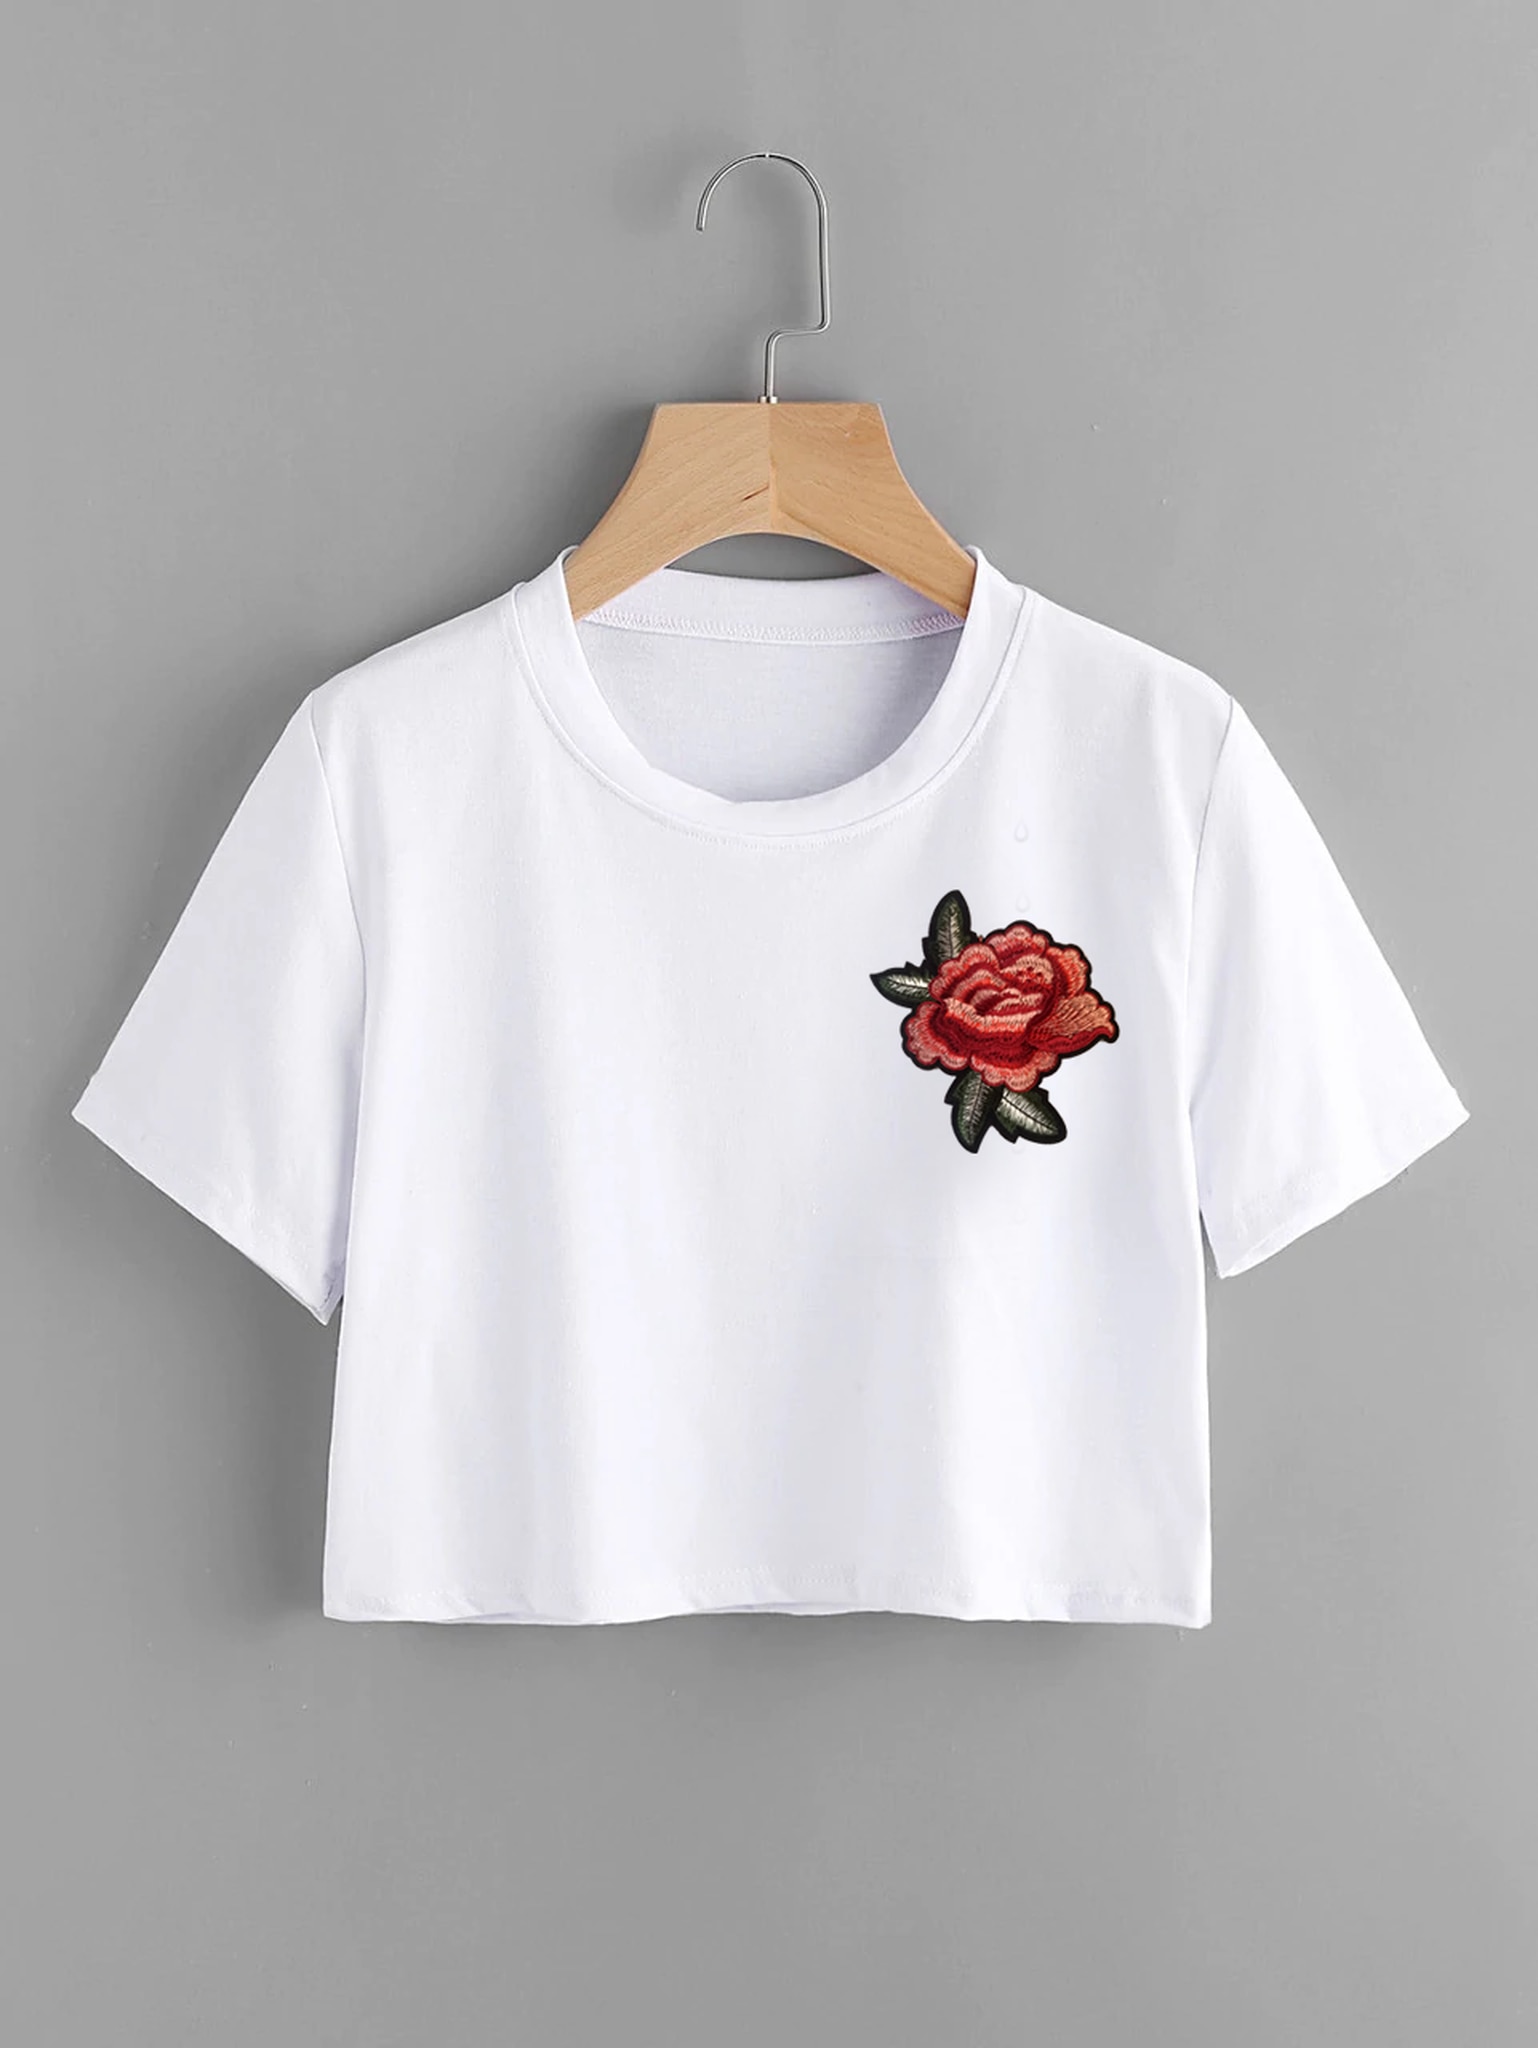 /2019/06/fifth-avenue-womens-ripzt33-embroidered-crop-t-shirt-white-image1.jpeg